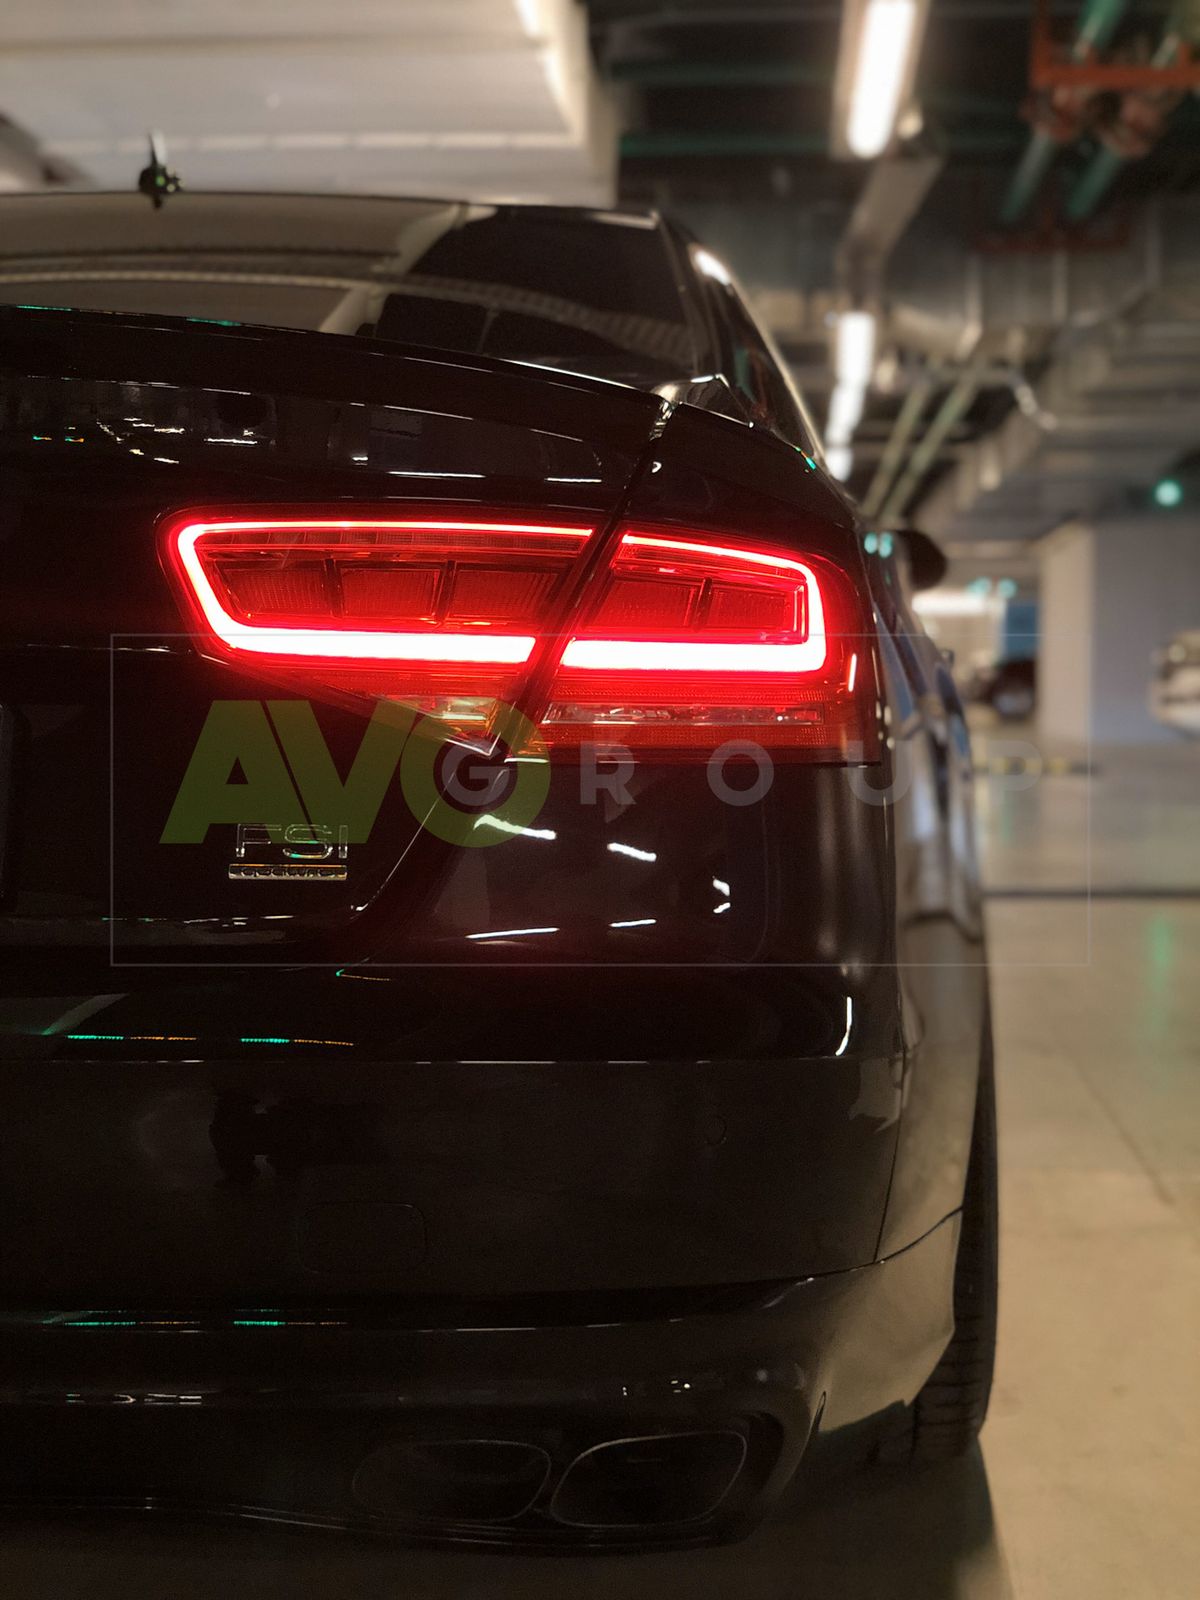 A Style Trunk boot spoiler for AUDI A8 S8 2010-2018